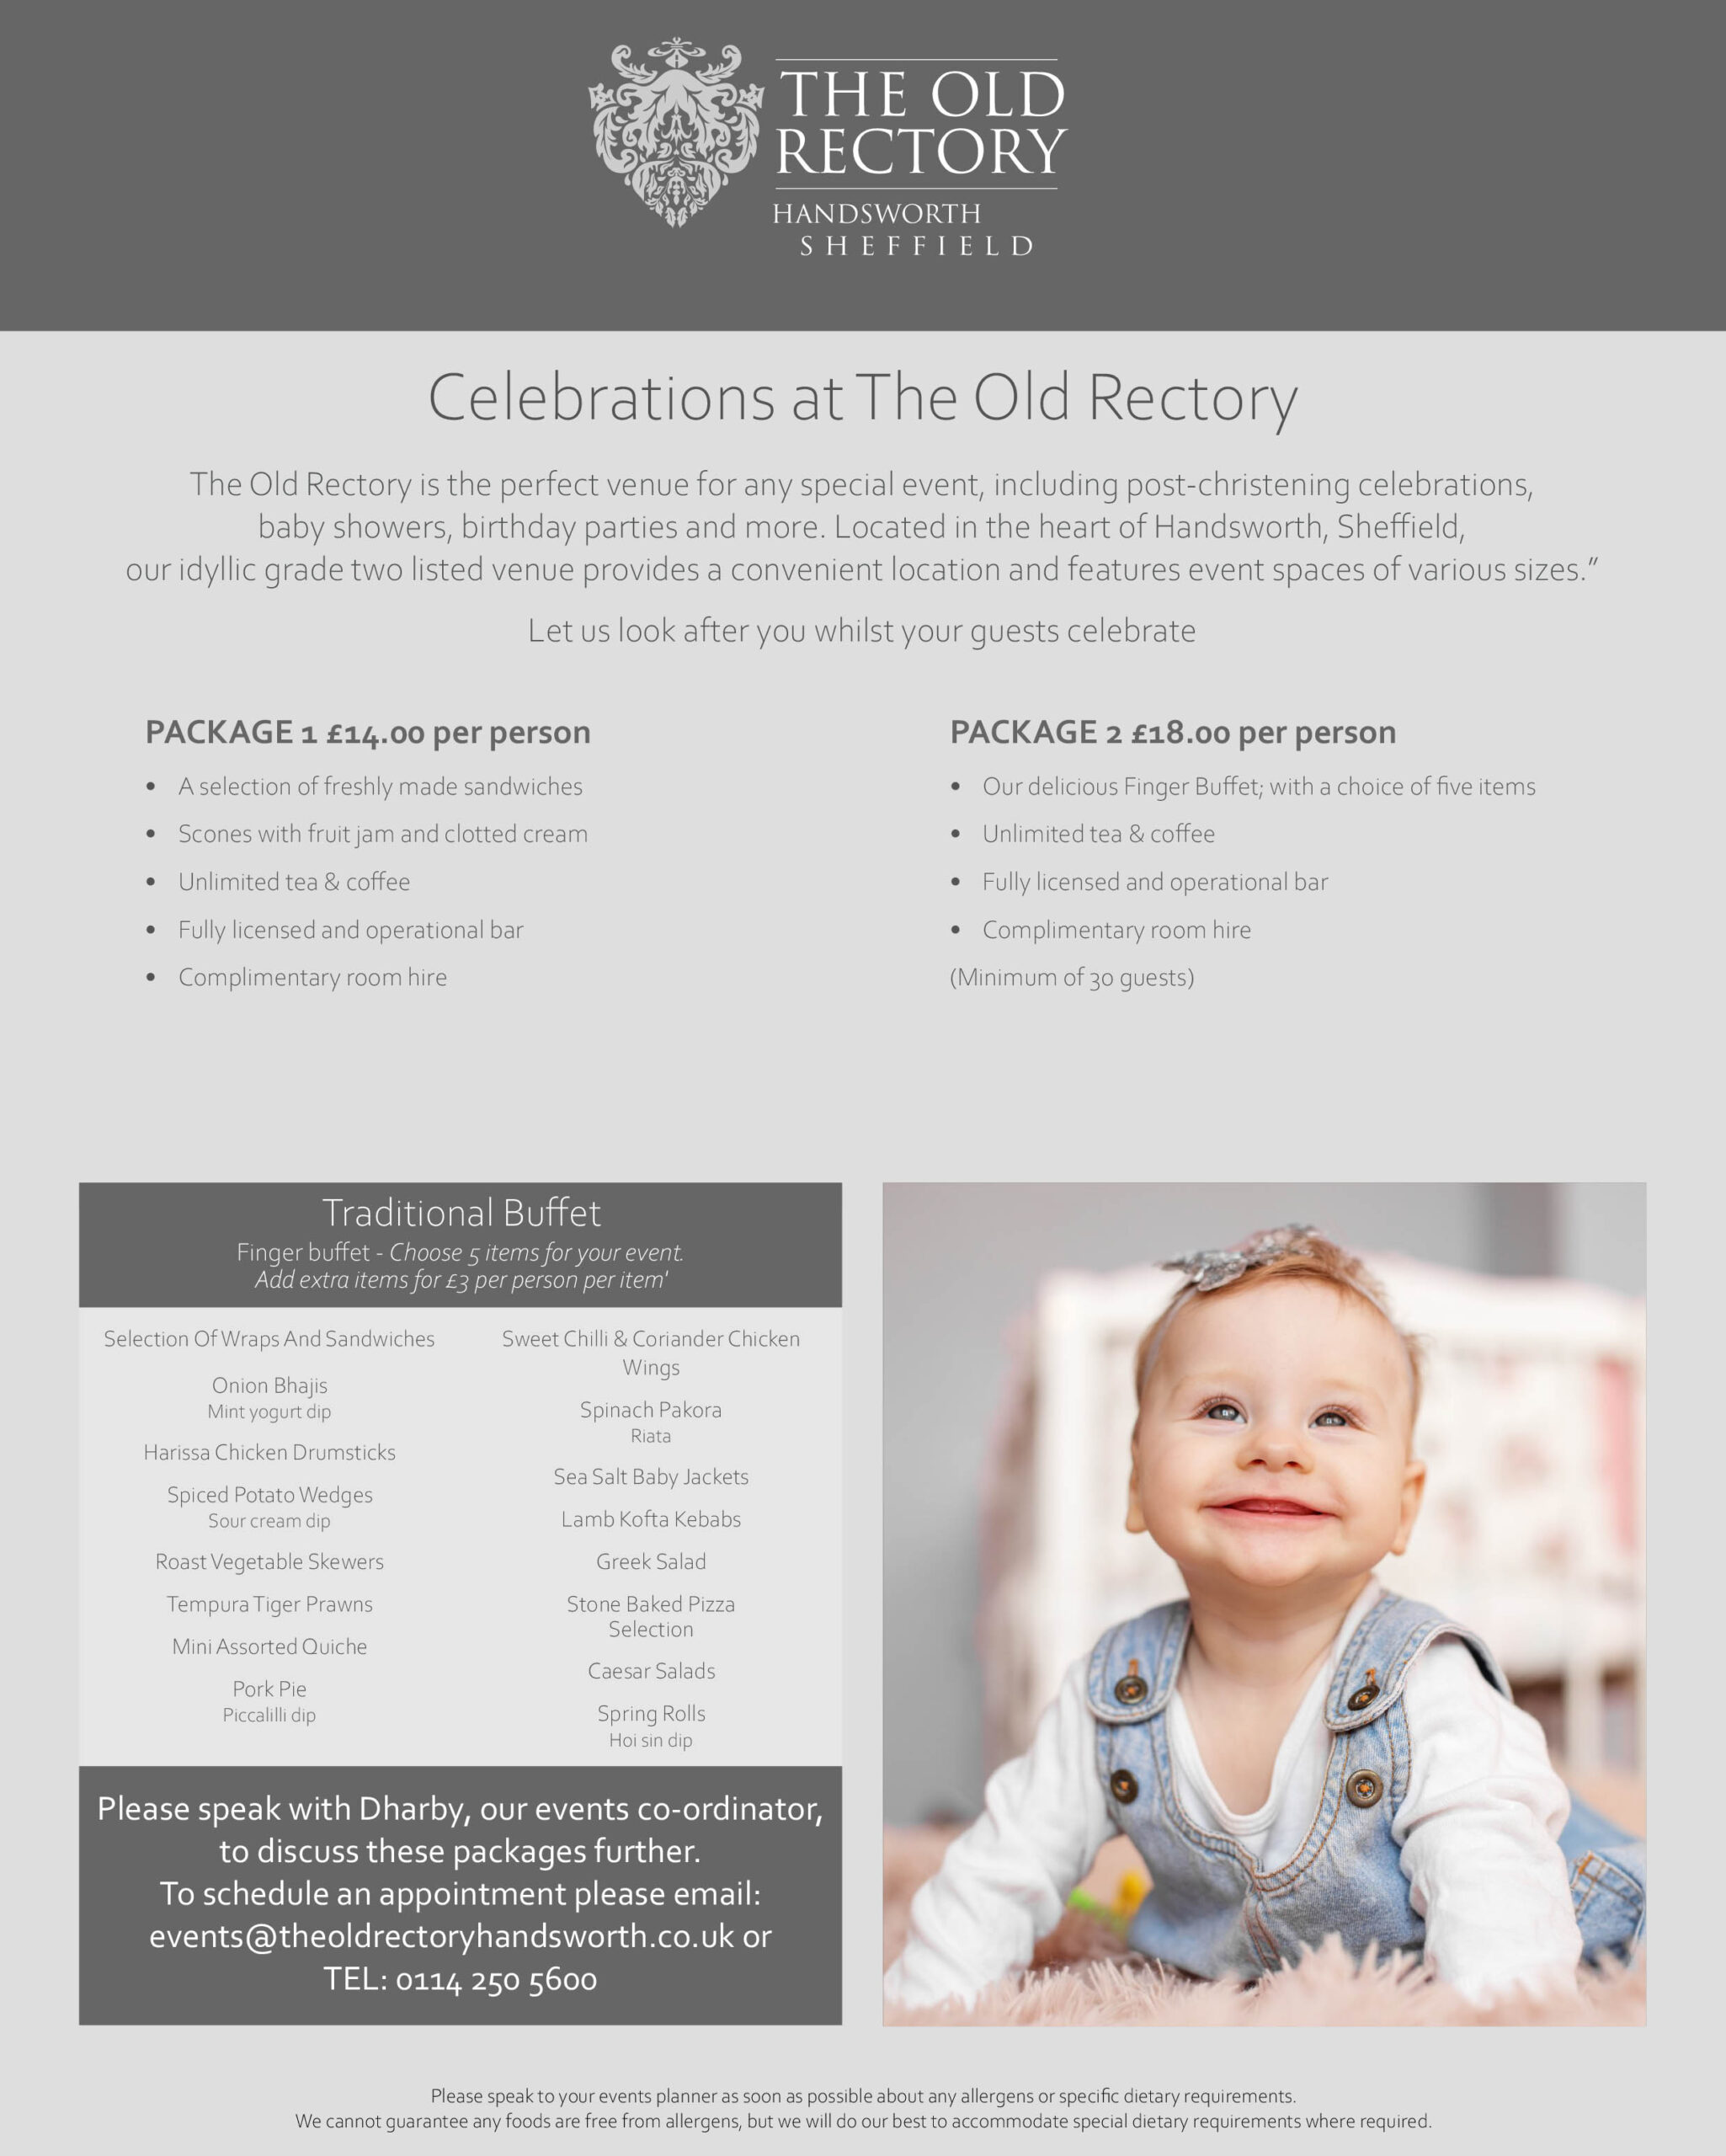 Celebration Day Package at the Old Rectory Handsworth Sheffield.